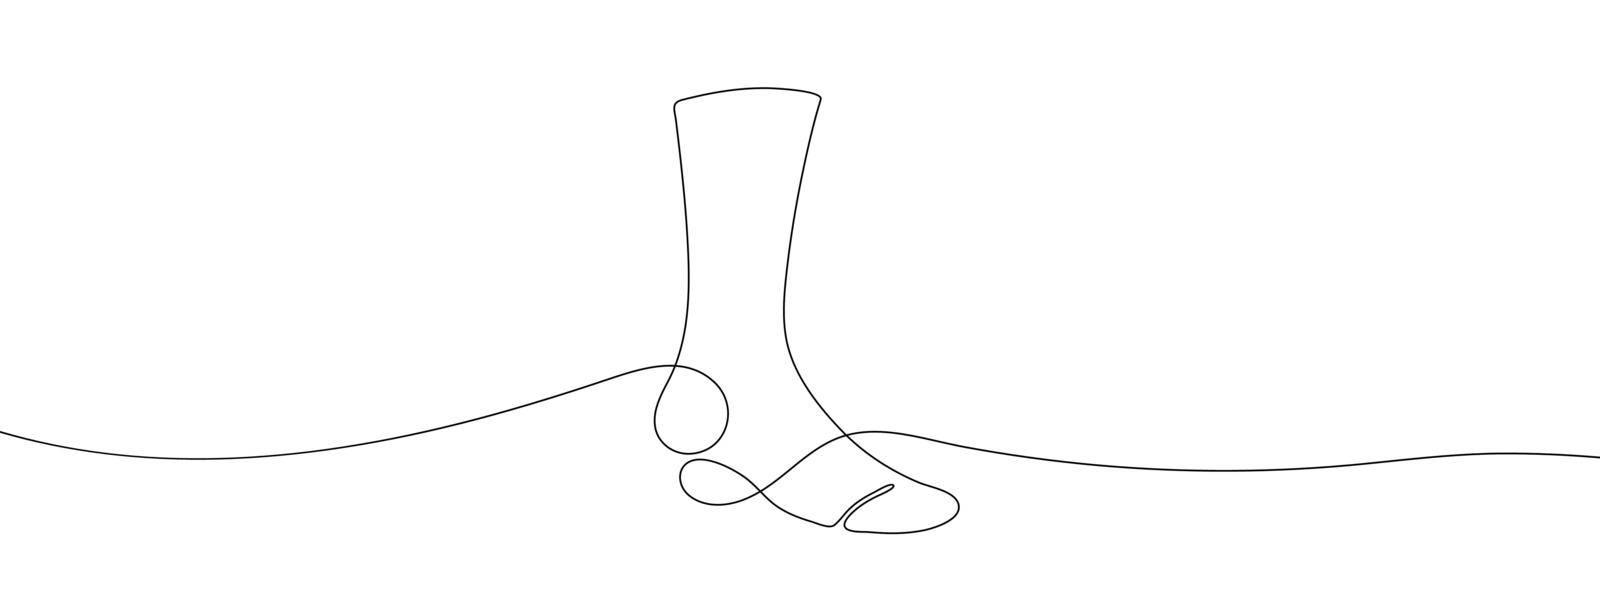 Continuous line drawing of socks. One line drawing background. by Chekman